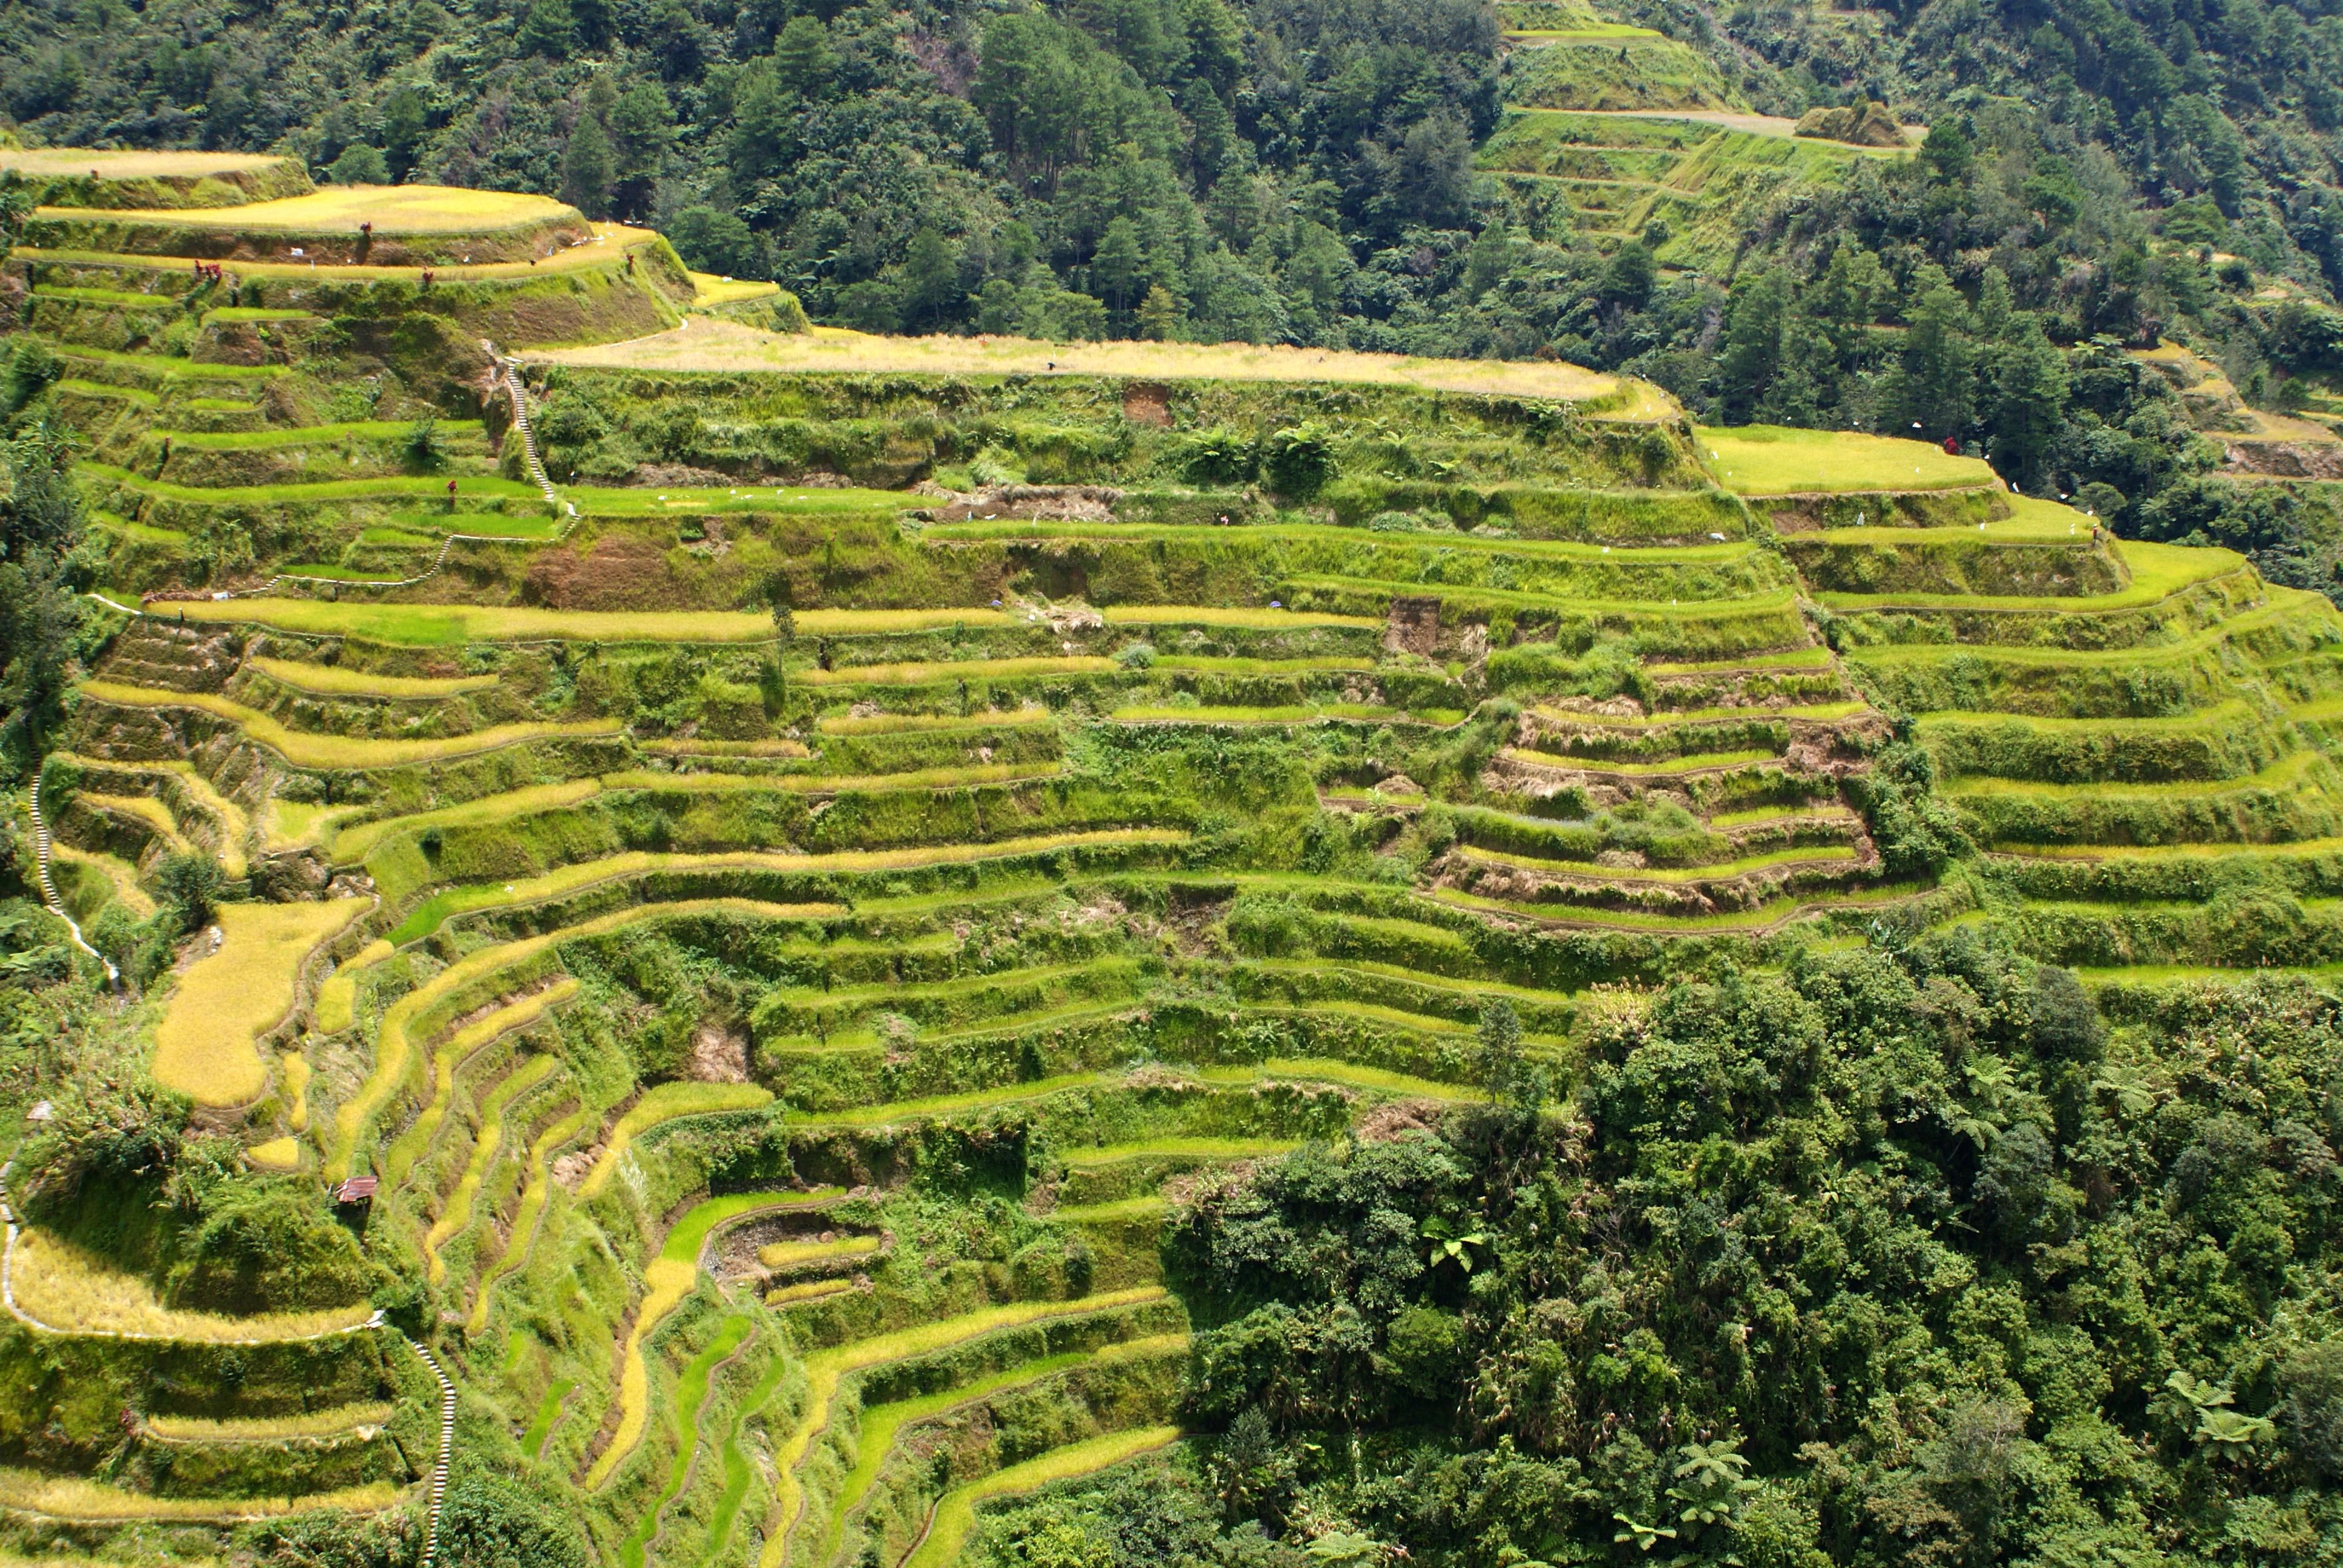 Banaue Rice Terraces Philippines Map Facts Location Information